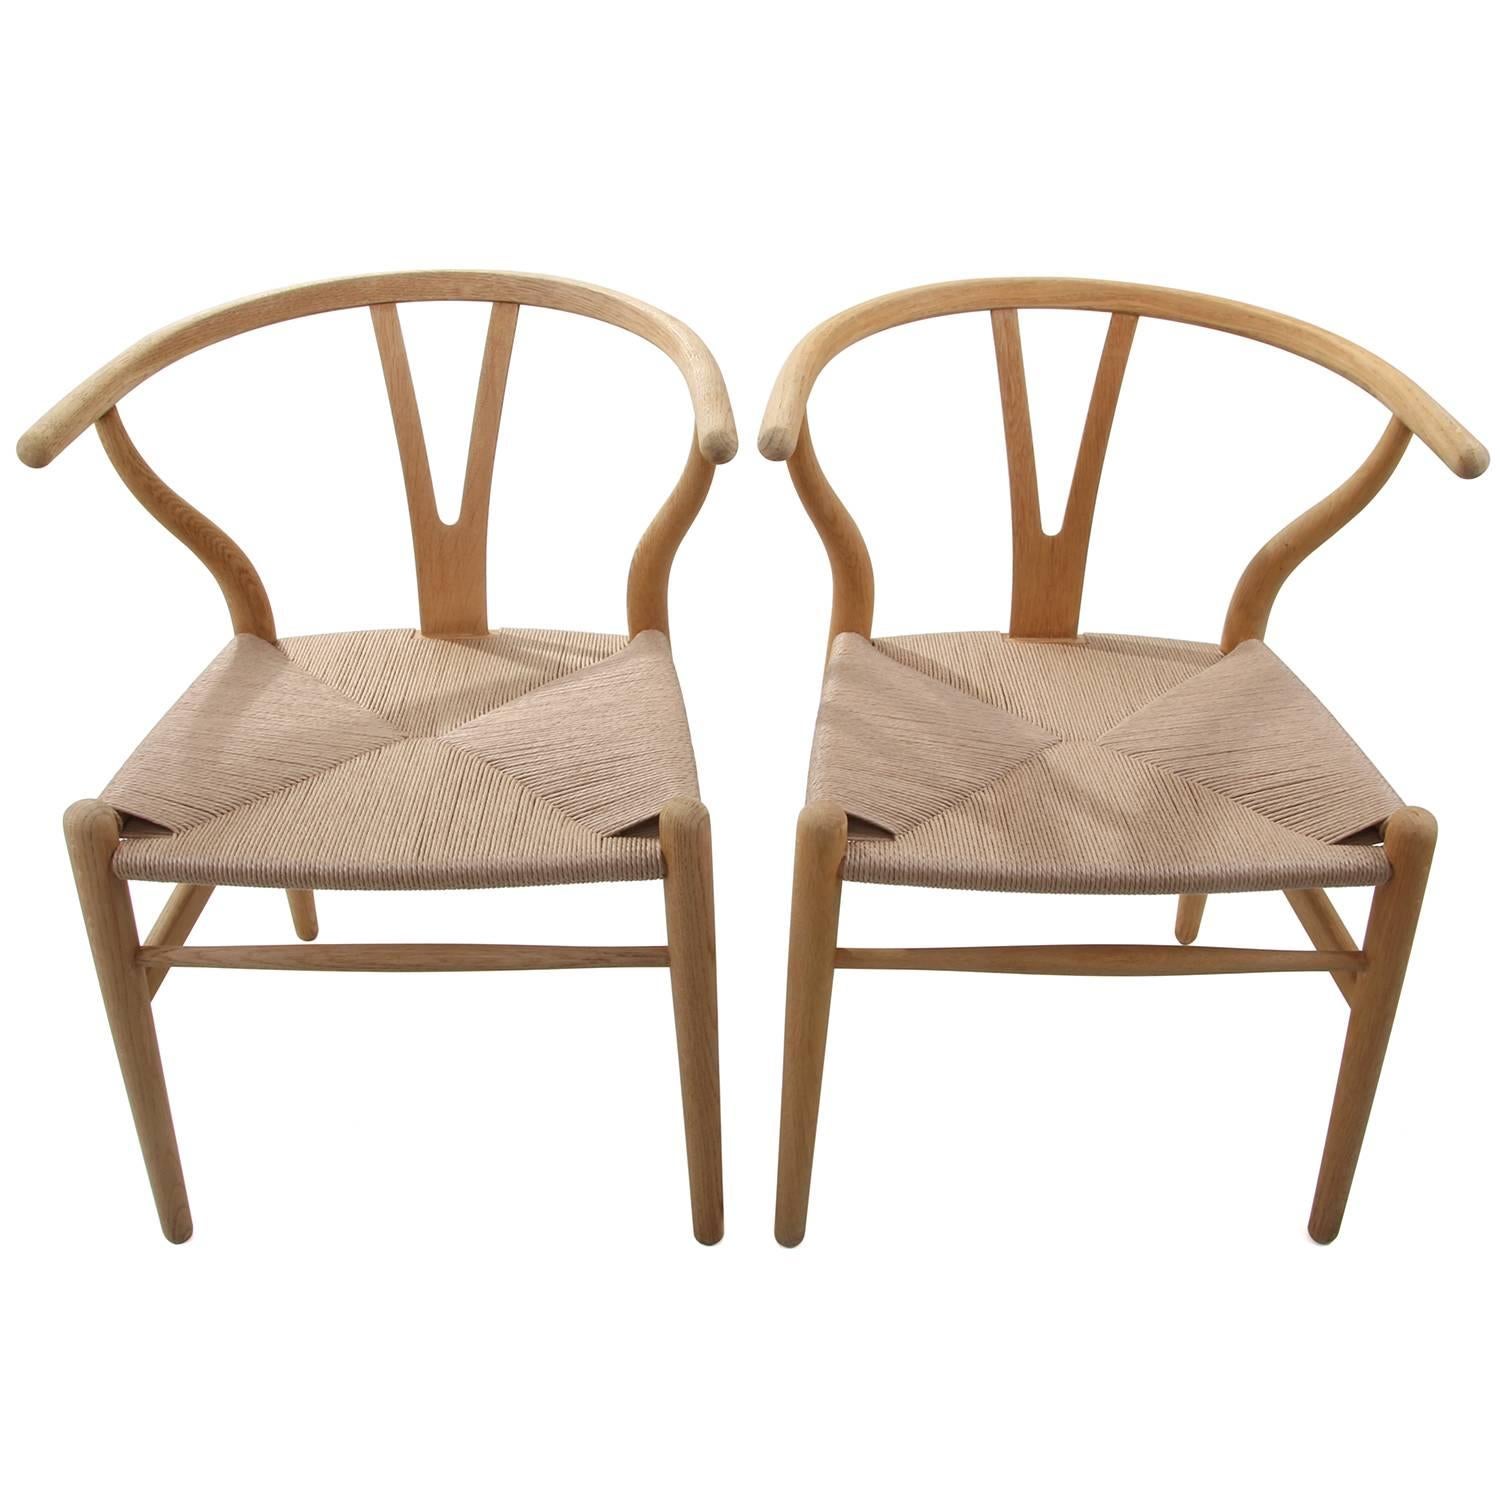 CH24 - WISHBONE CHAIRS by Hans J Wegner for Carl Hansen & Søn in 1949 - iconic Danish design - two oak Y-chairs, soap-treated and fitted with new woven paper cord seats. In excellent vintage condition!

The CH24 or WISHBONE Chair is by far the